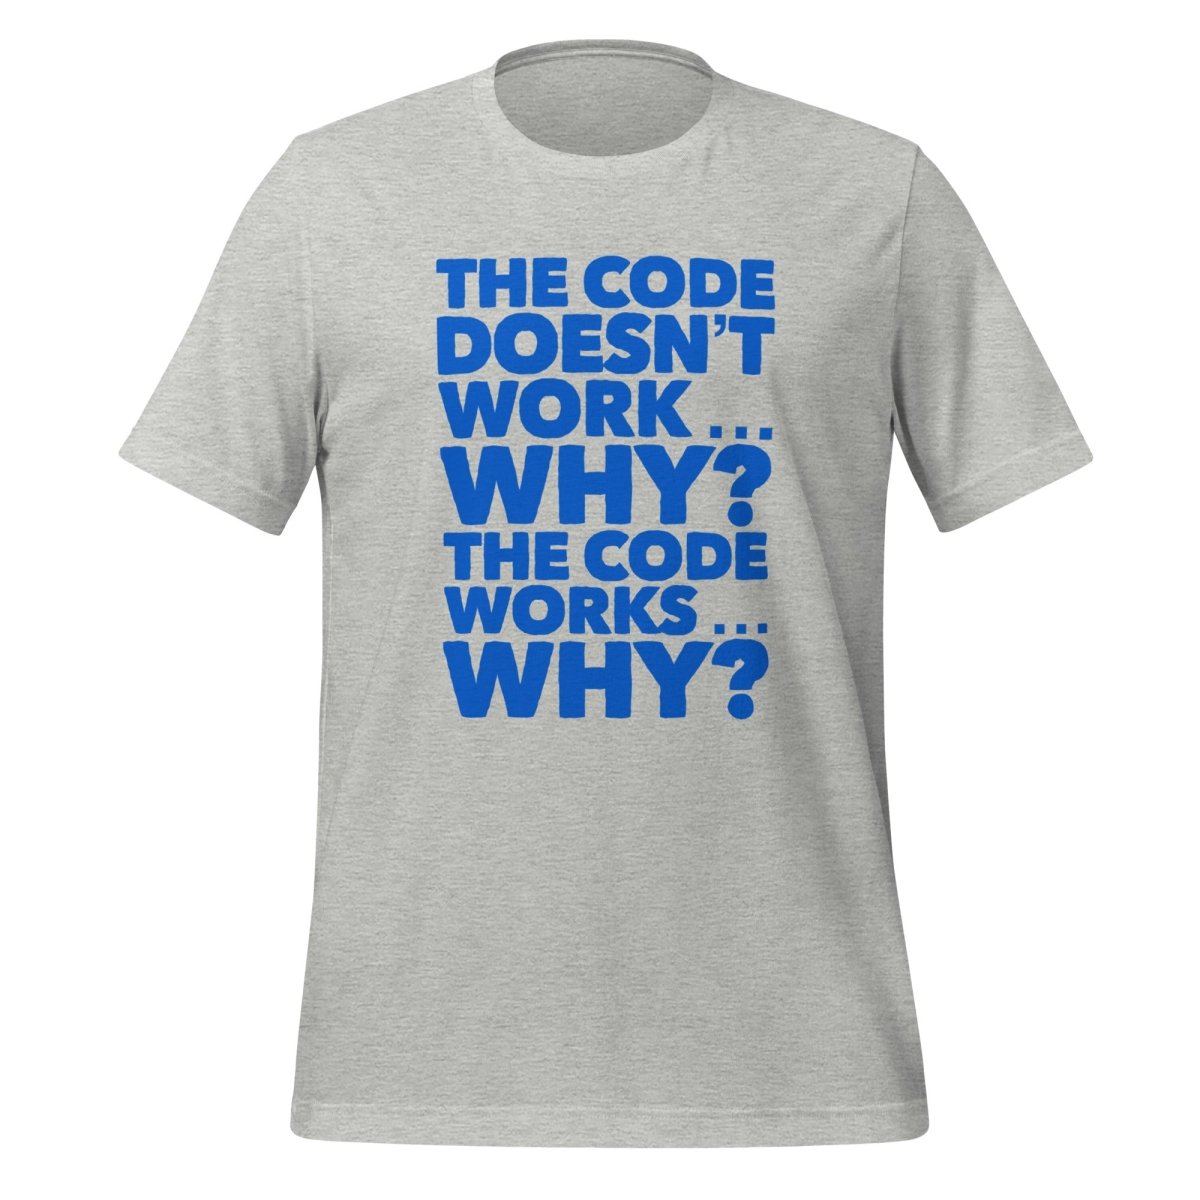 The code doesn't work, why? T - Shirt 2 (unisex) - Athletic Heather - AI Store